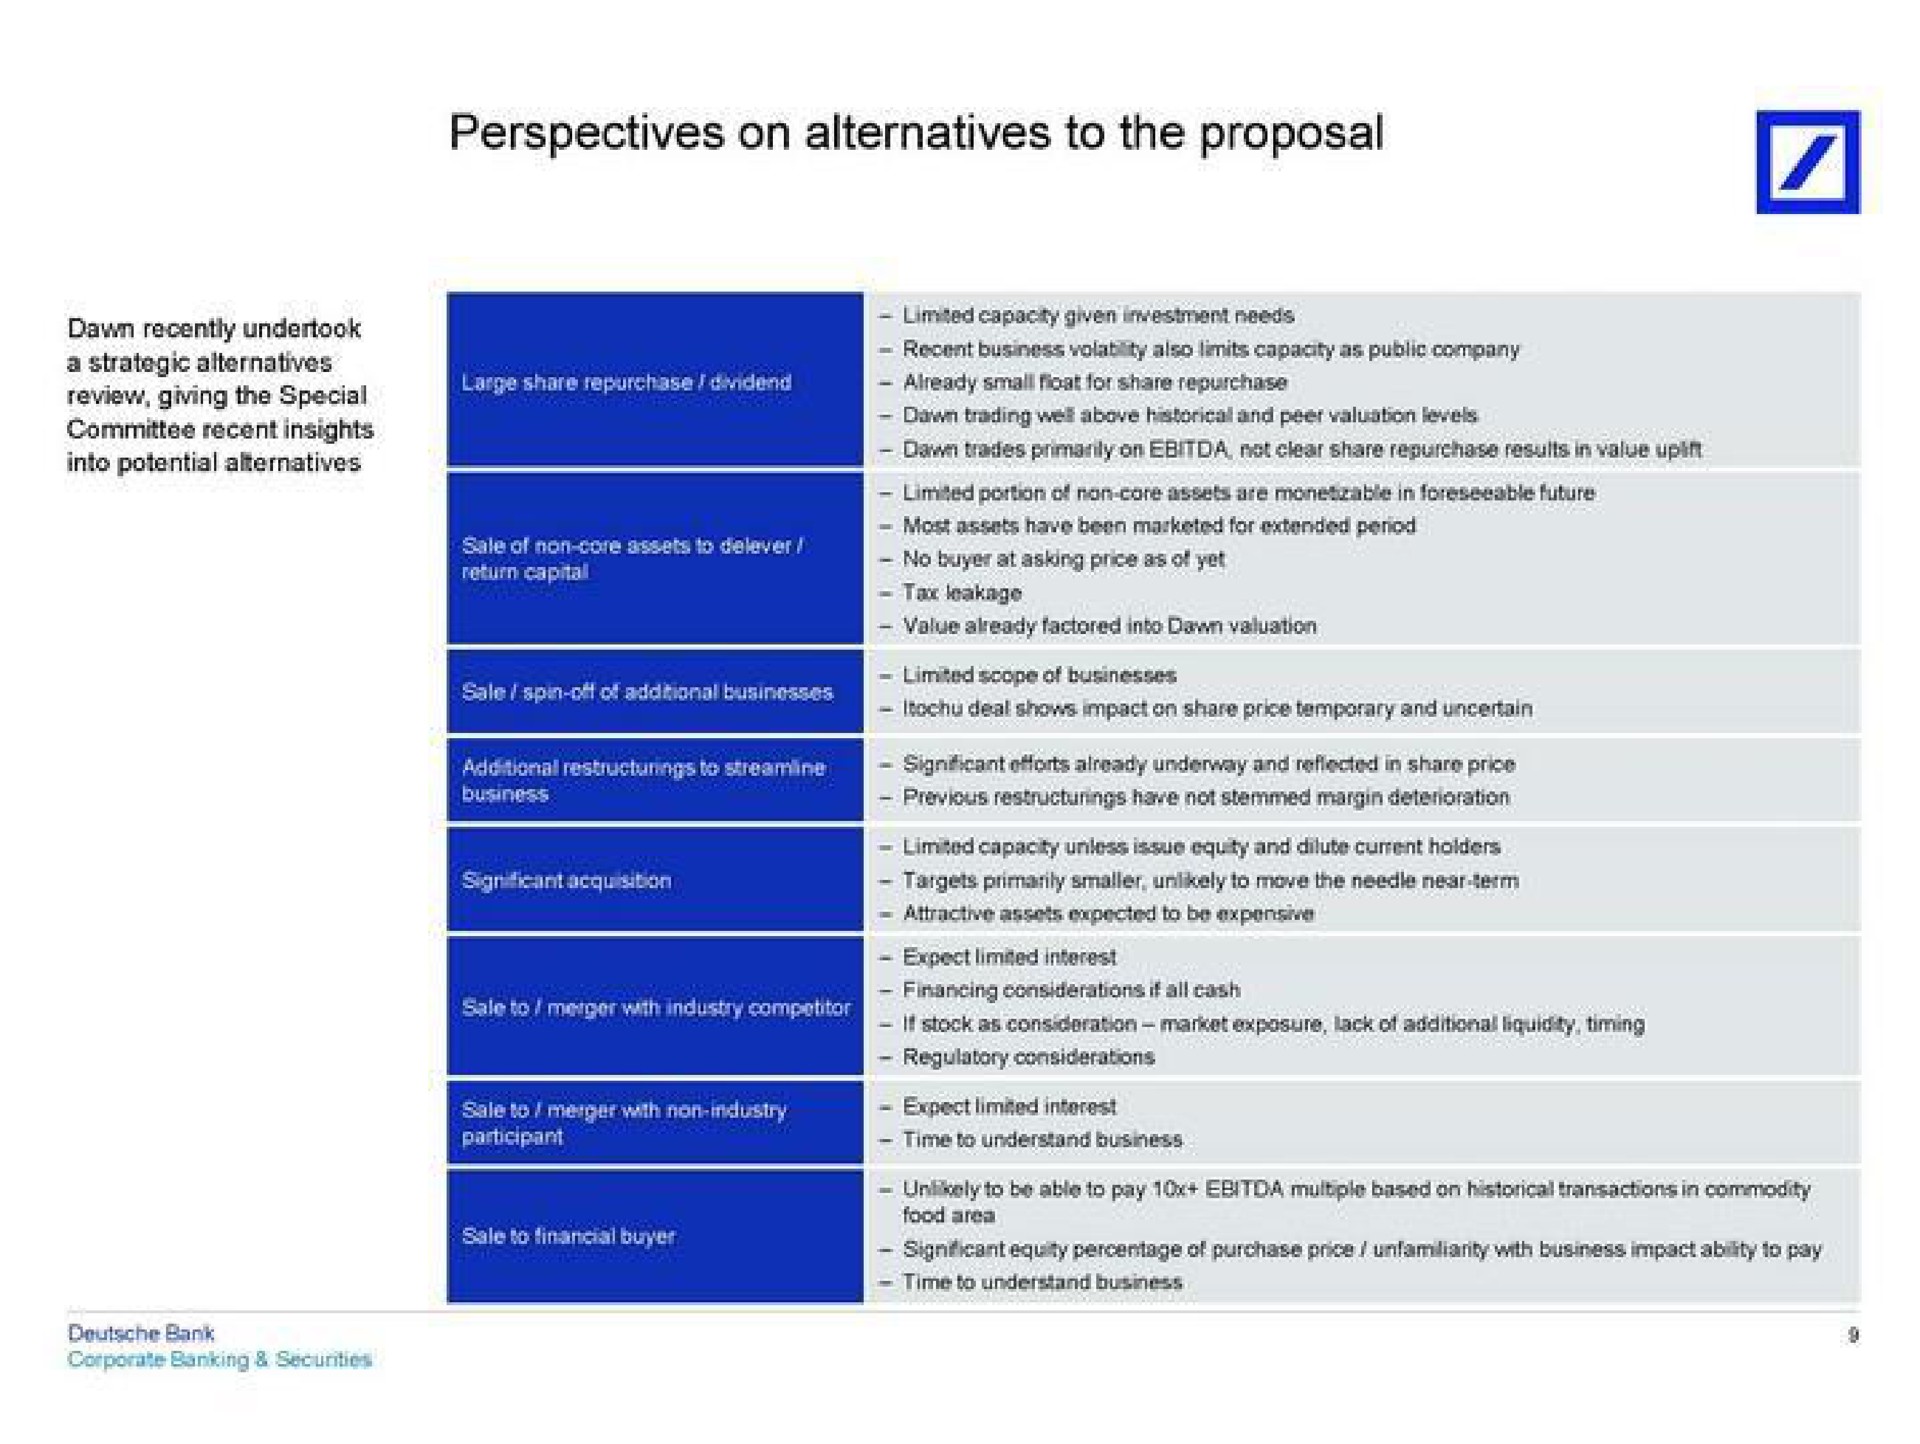 perspectives on alternatives to the proposal | Deutsche Bank